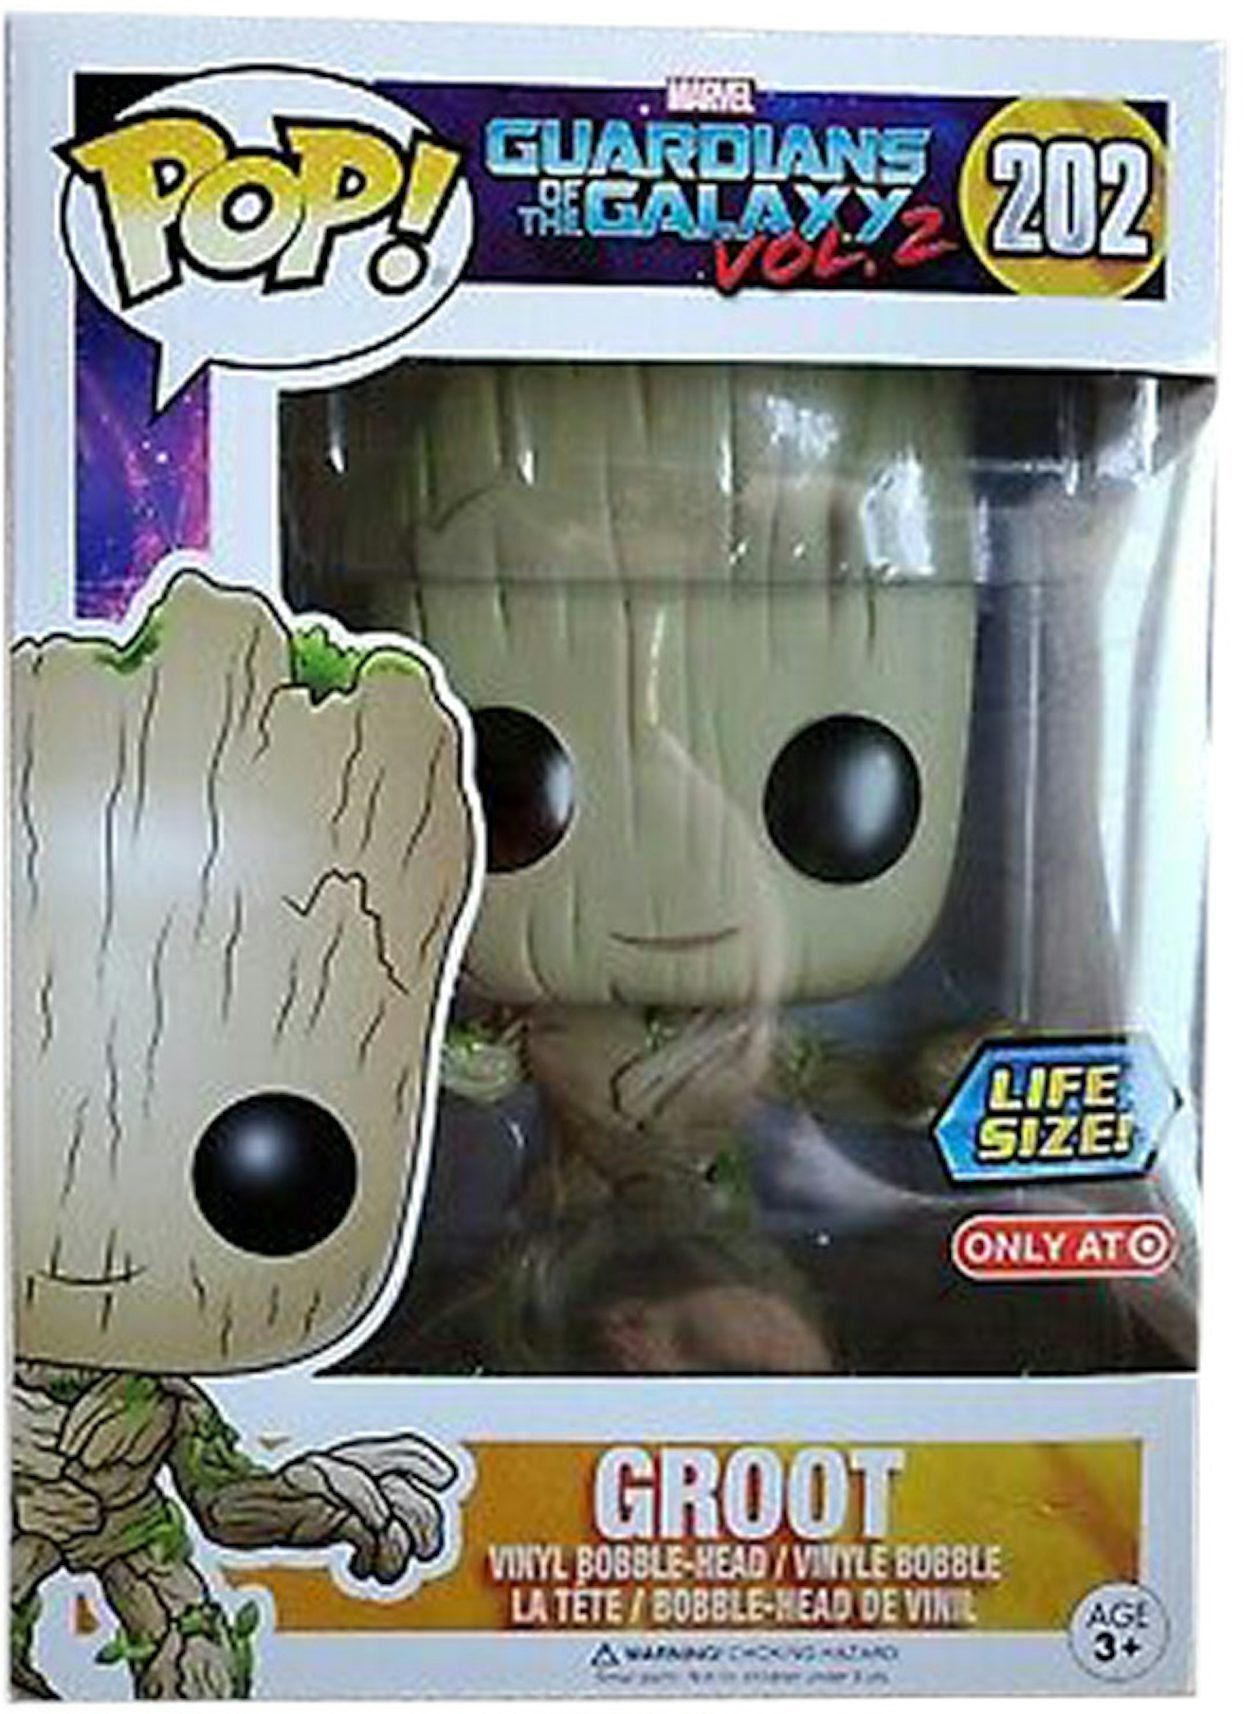 https://images.stockx.com/images/Funko-Pop-Marvel-Guardians-of-the-Galaxy-Vol-2-Groot-Life-Size-Target-Exclusive-Bobble-Head-202.jpg?fit=fill&bg=FFFFFF&w=1200&h=857&fm=jpg&auto=compress&dpr=2&trim=color&updated_at=1652466261&q=60